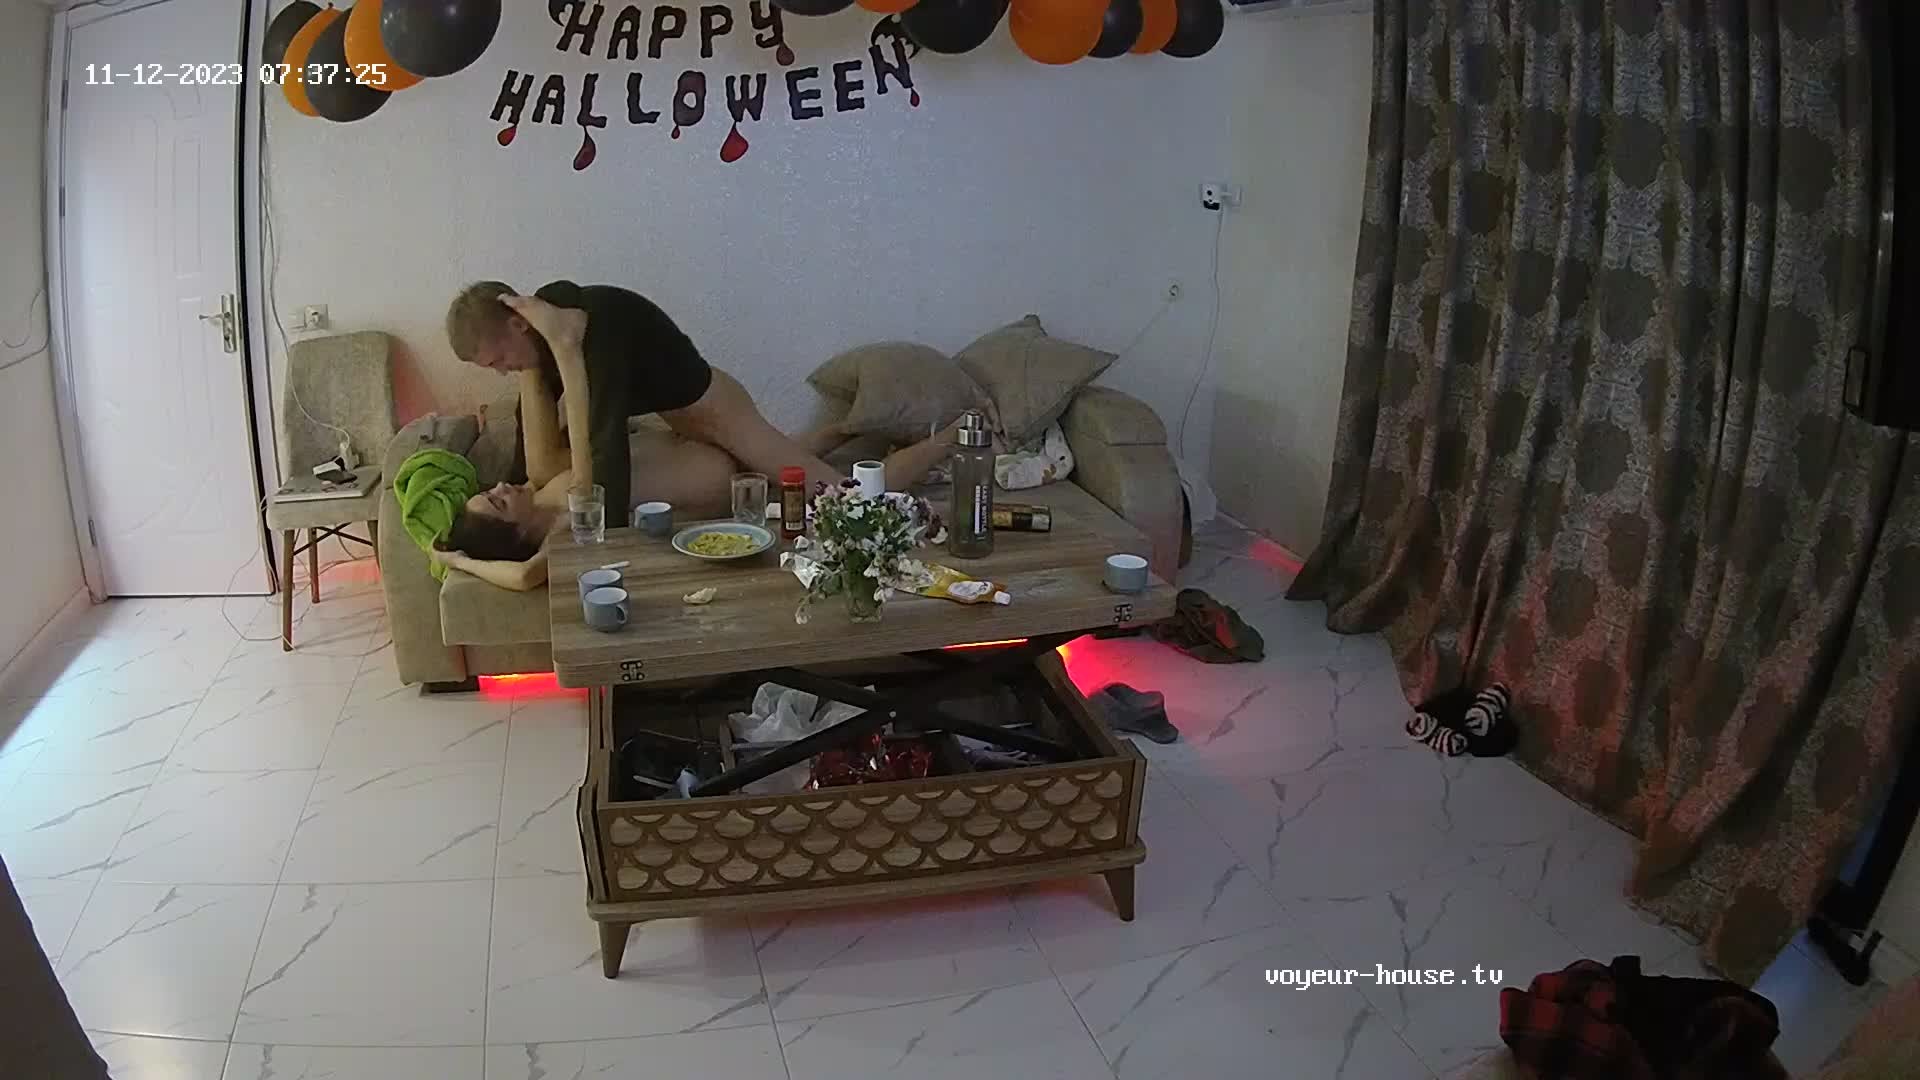 Roza and Gabi going for round V of pussy eating and sex, Nov12/23